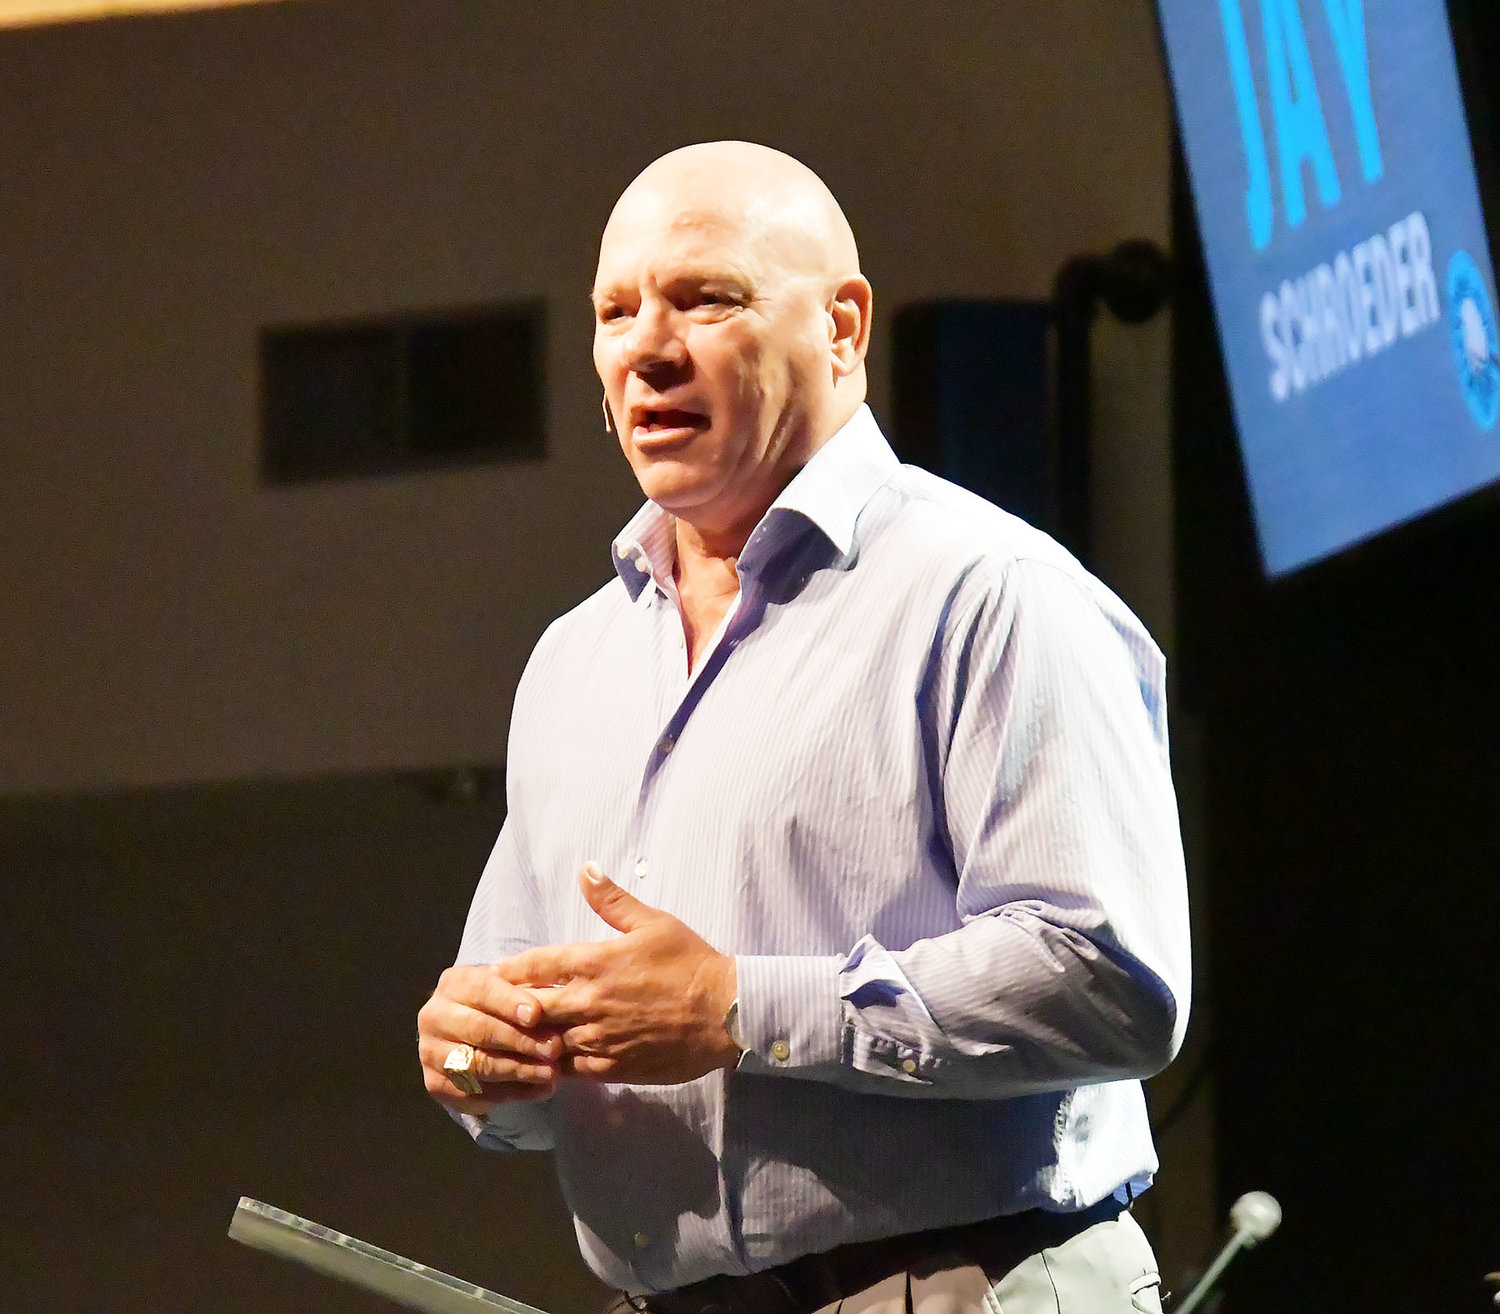 Jay Schroeder took to the stage to bring his message to Family Life Fellowship. Schroeder said although he really wanted to play baseball, God called him to the gridiron instead.